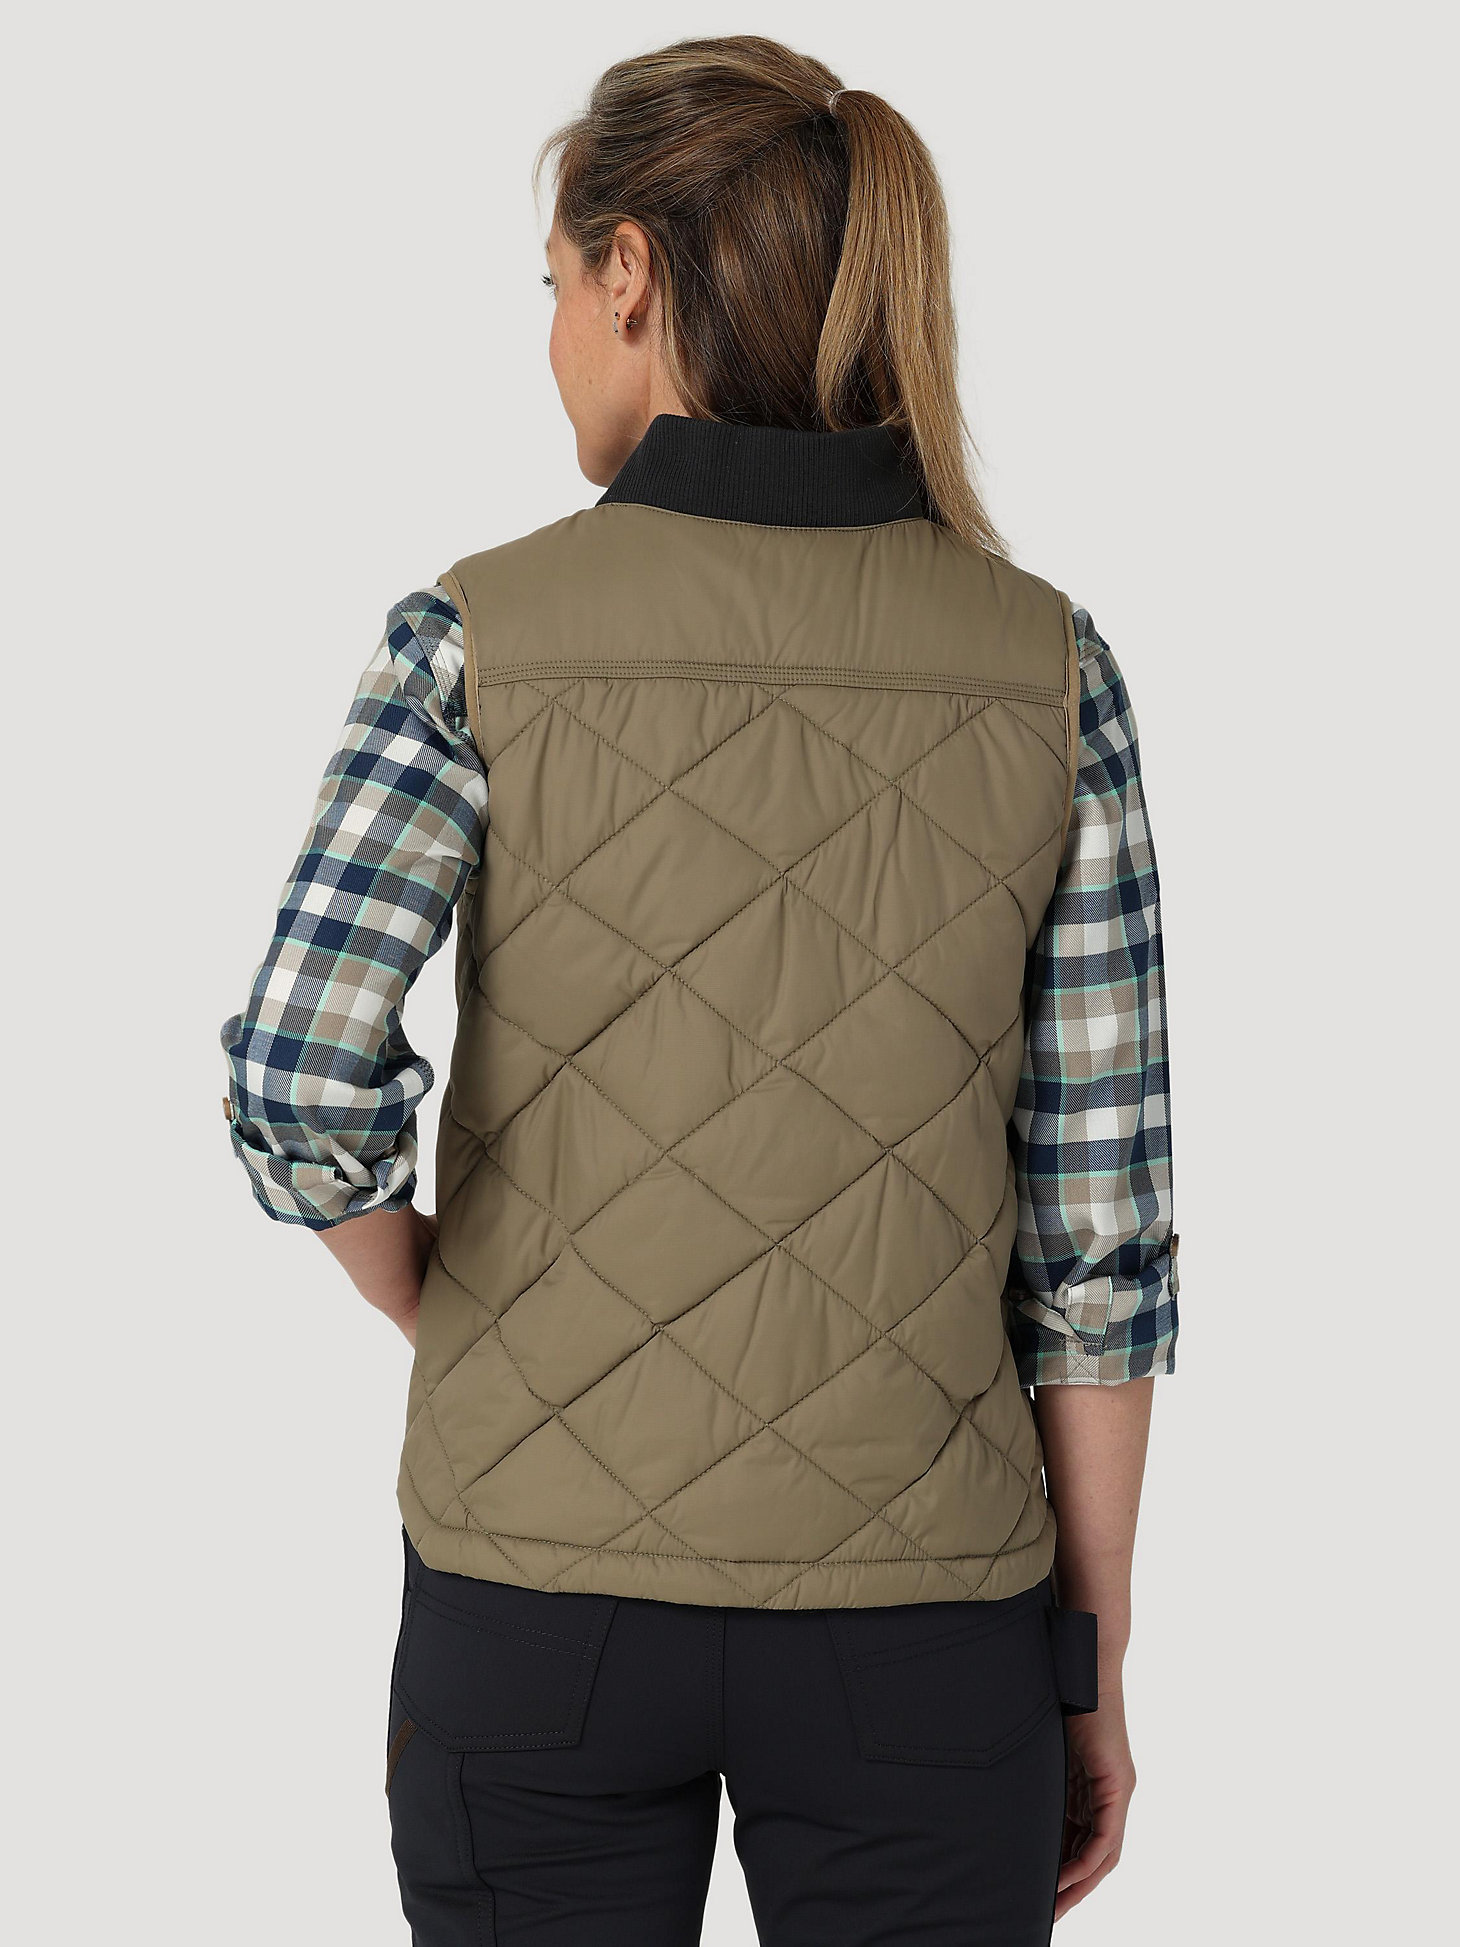 Womens RIGGS Tough Layers Quilted Work Vest in Bark alternative view 4